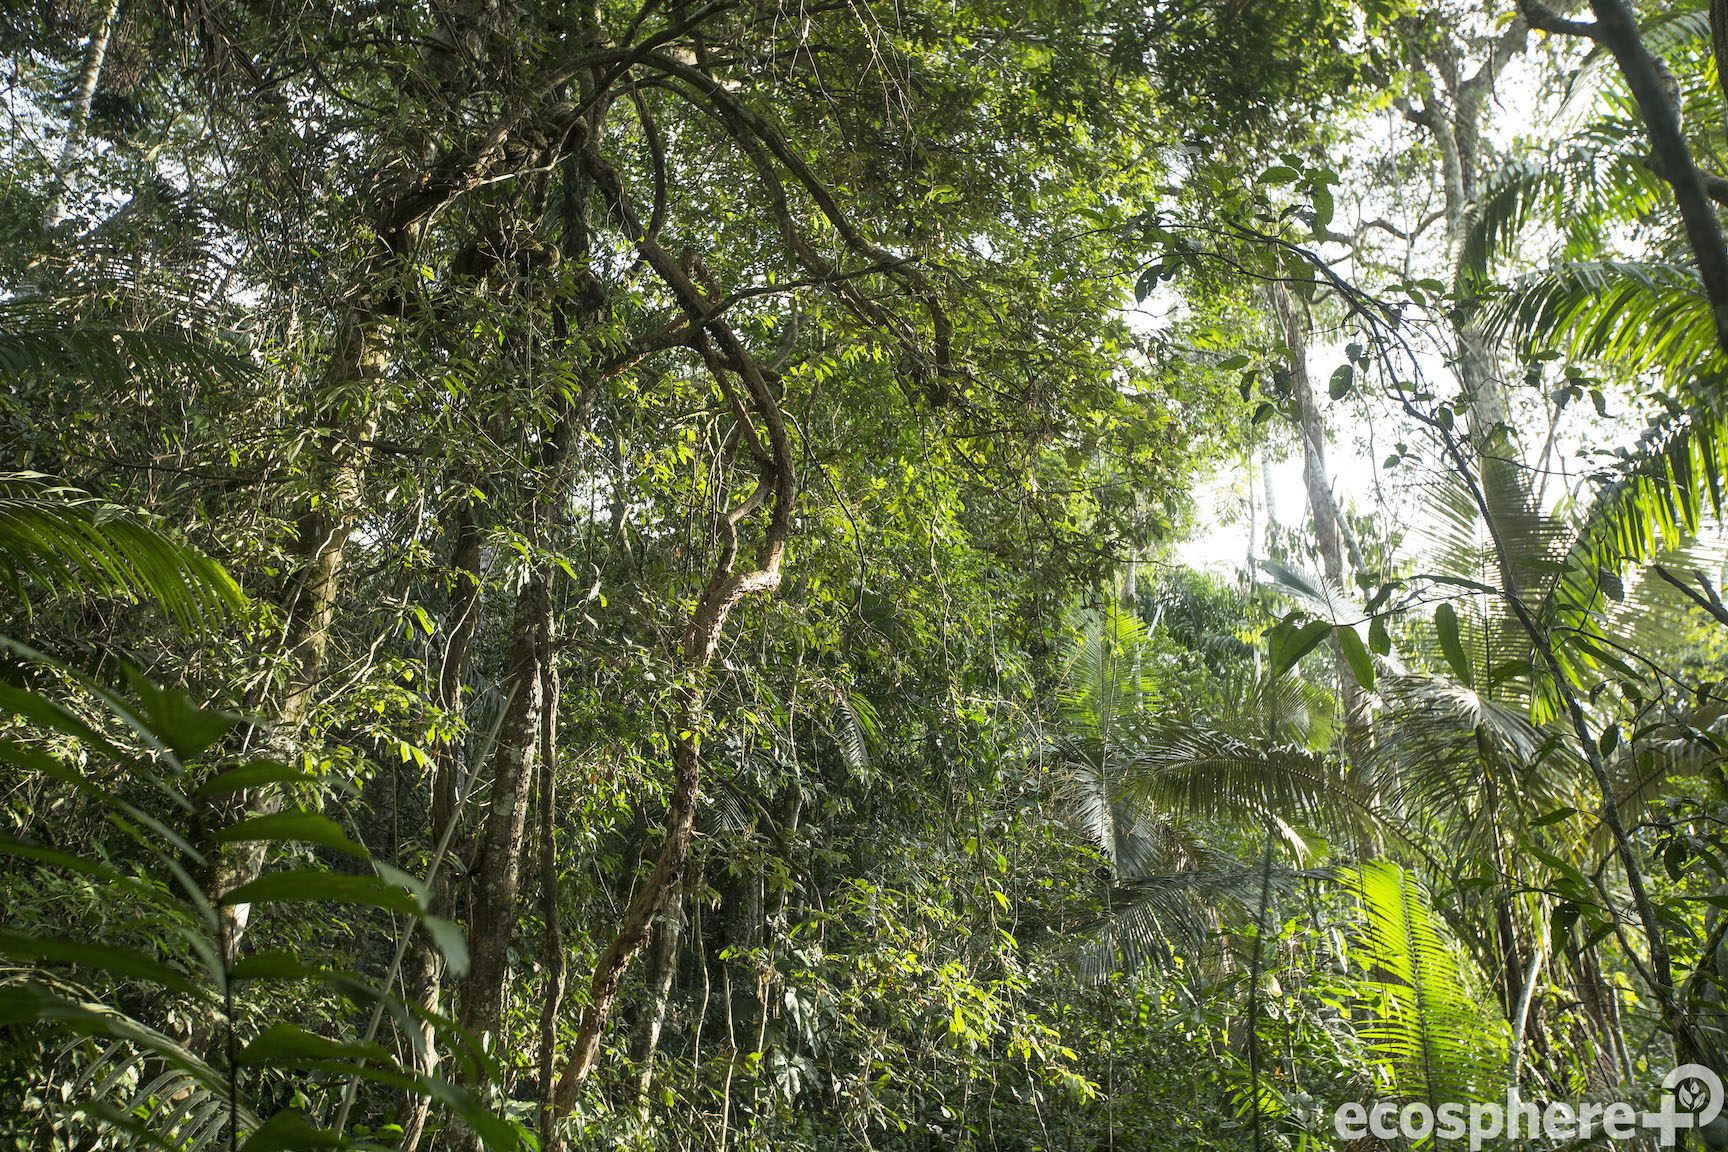 New IETA paper calls for increased investment to prevent deforestation